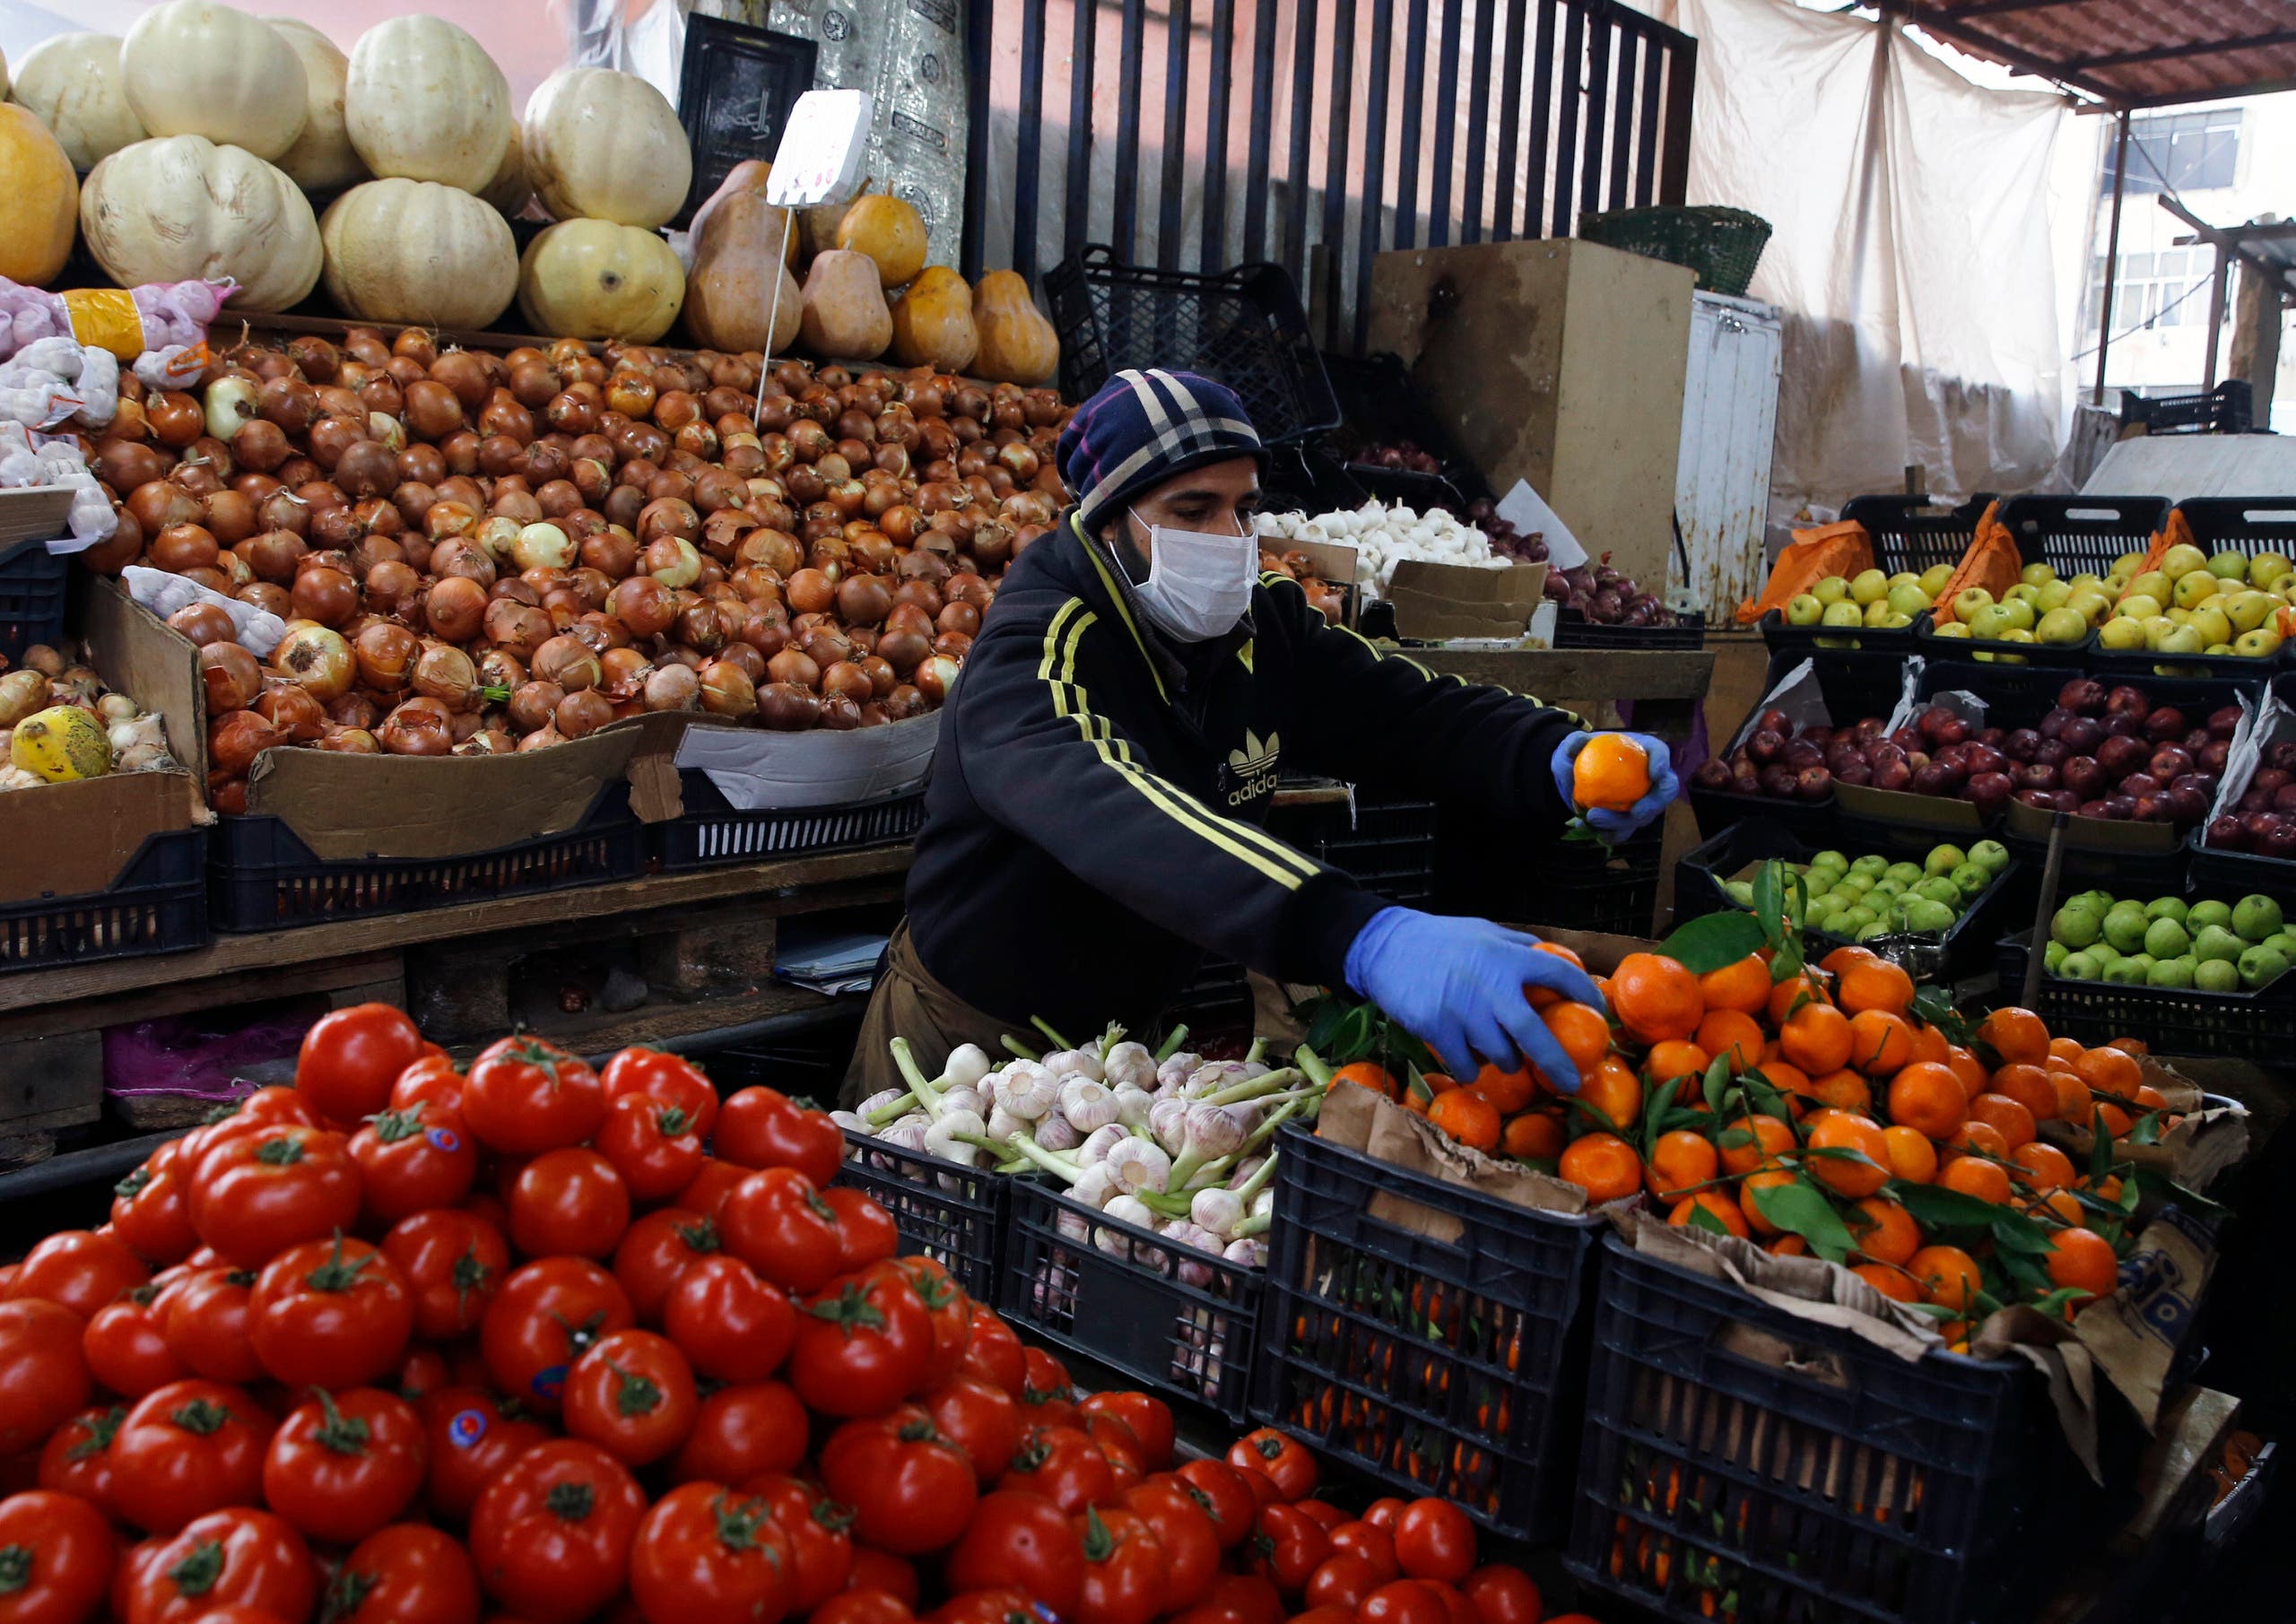 Syrian Sami Jawabreh wears a mask and gloves, as he rearranges fruits on display for sale at his shop, in Beirut on March 18, 2020. (AP) 